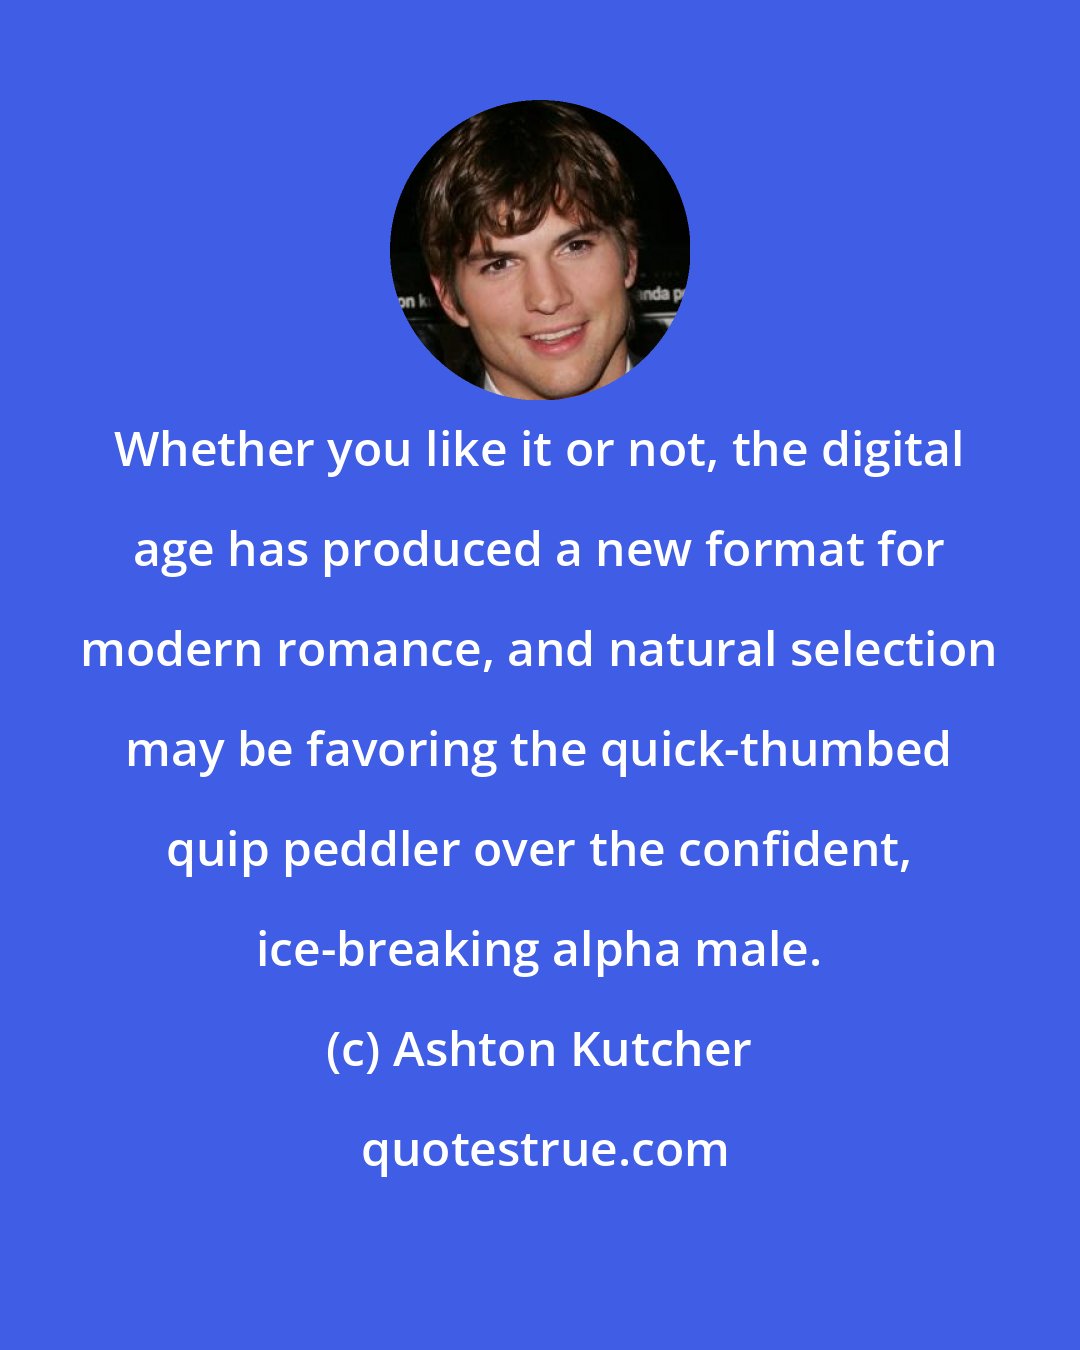 Ashton Kutcher: Whether you like it or not, the digital age has produced a new format for modern romance, and natural selection may be favoring the quick-thumbed quip peddler over the confident, ice-breaking alpha male.